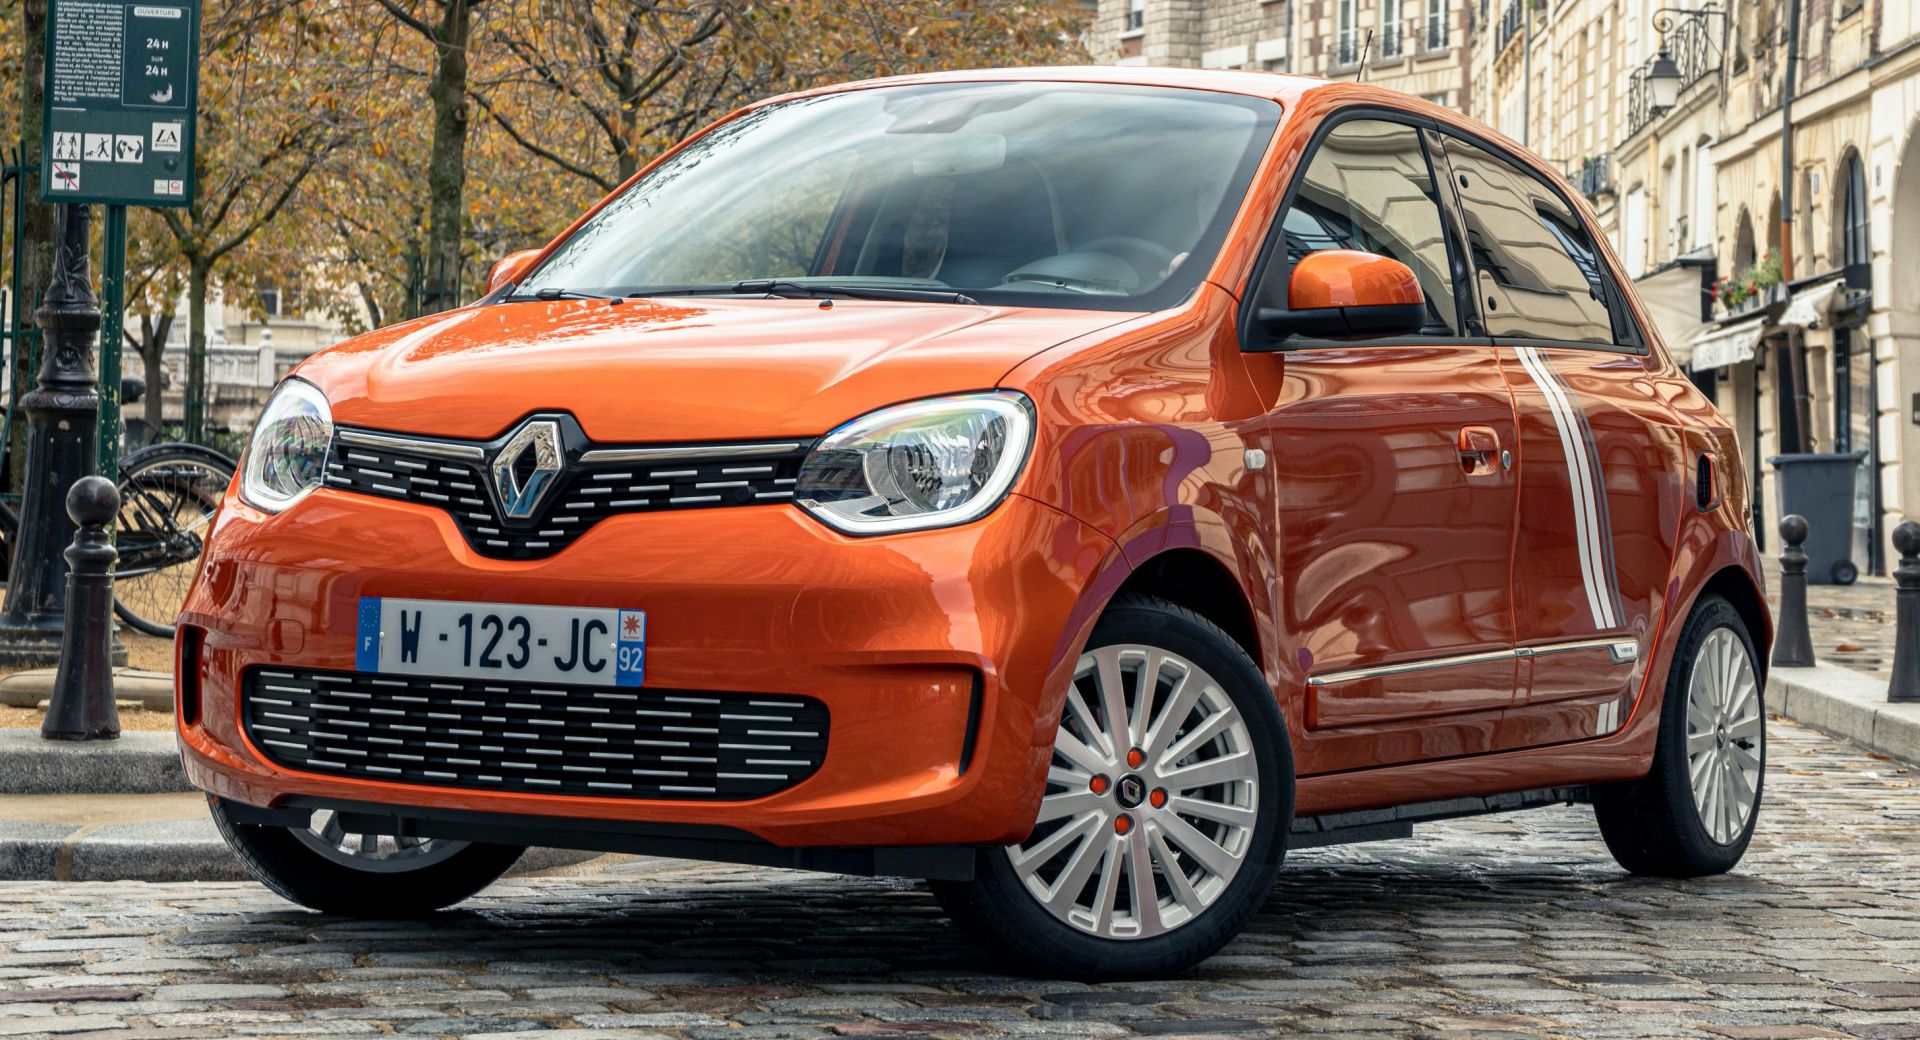 https://www.carscoops.com/wp-content/uploads/2020/10/2021-Renault-Twingo-Electric-Vibes-special-edition-0.jpg